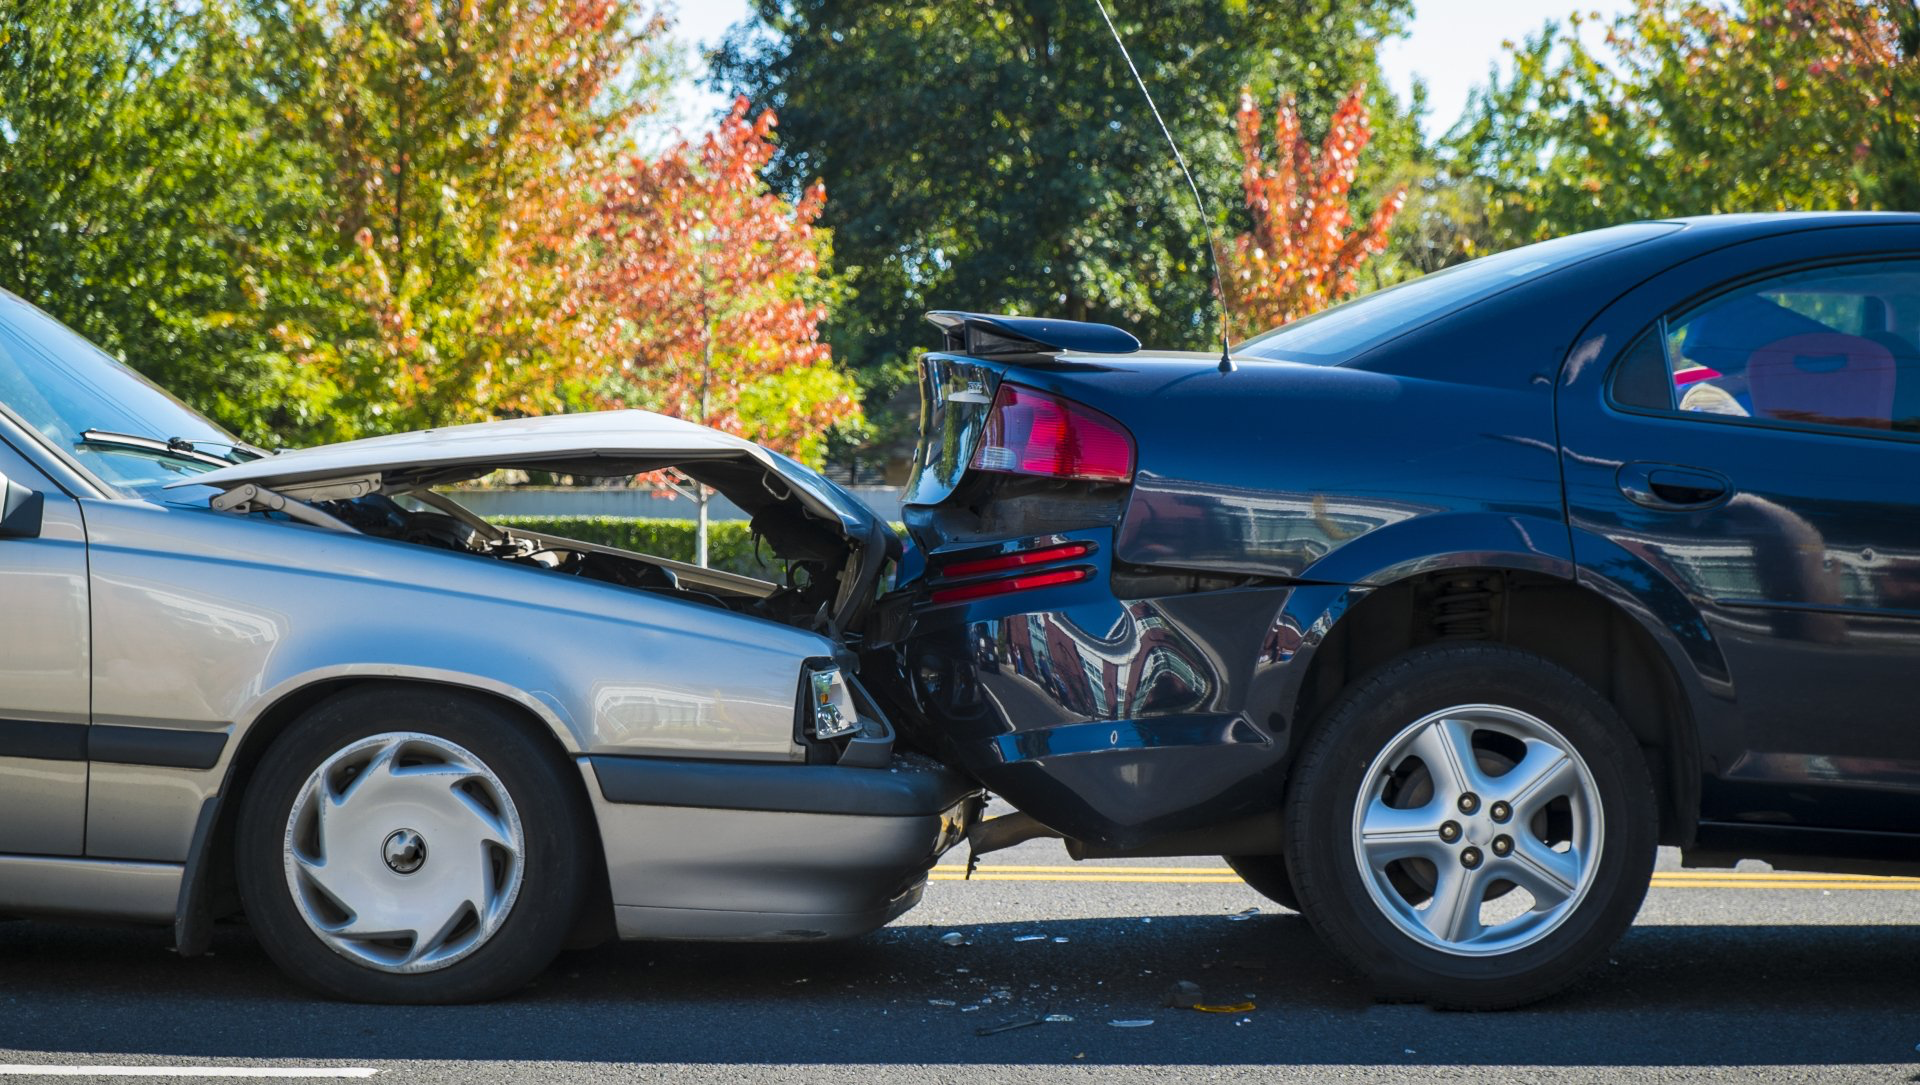 Should you accept car accident insurance offer